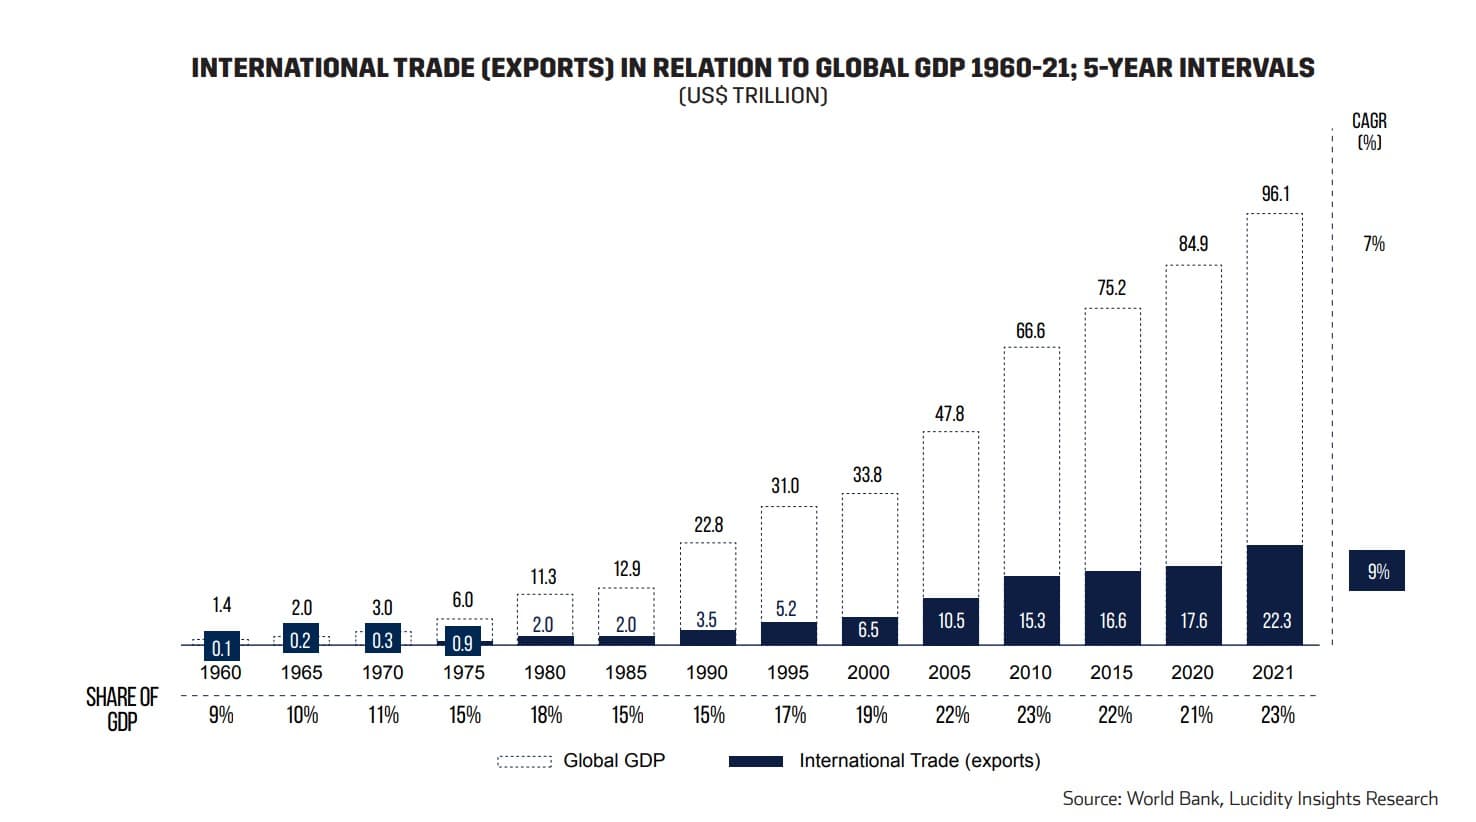 International Trade (Exports) In Relation to Global GDP 1960-2021